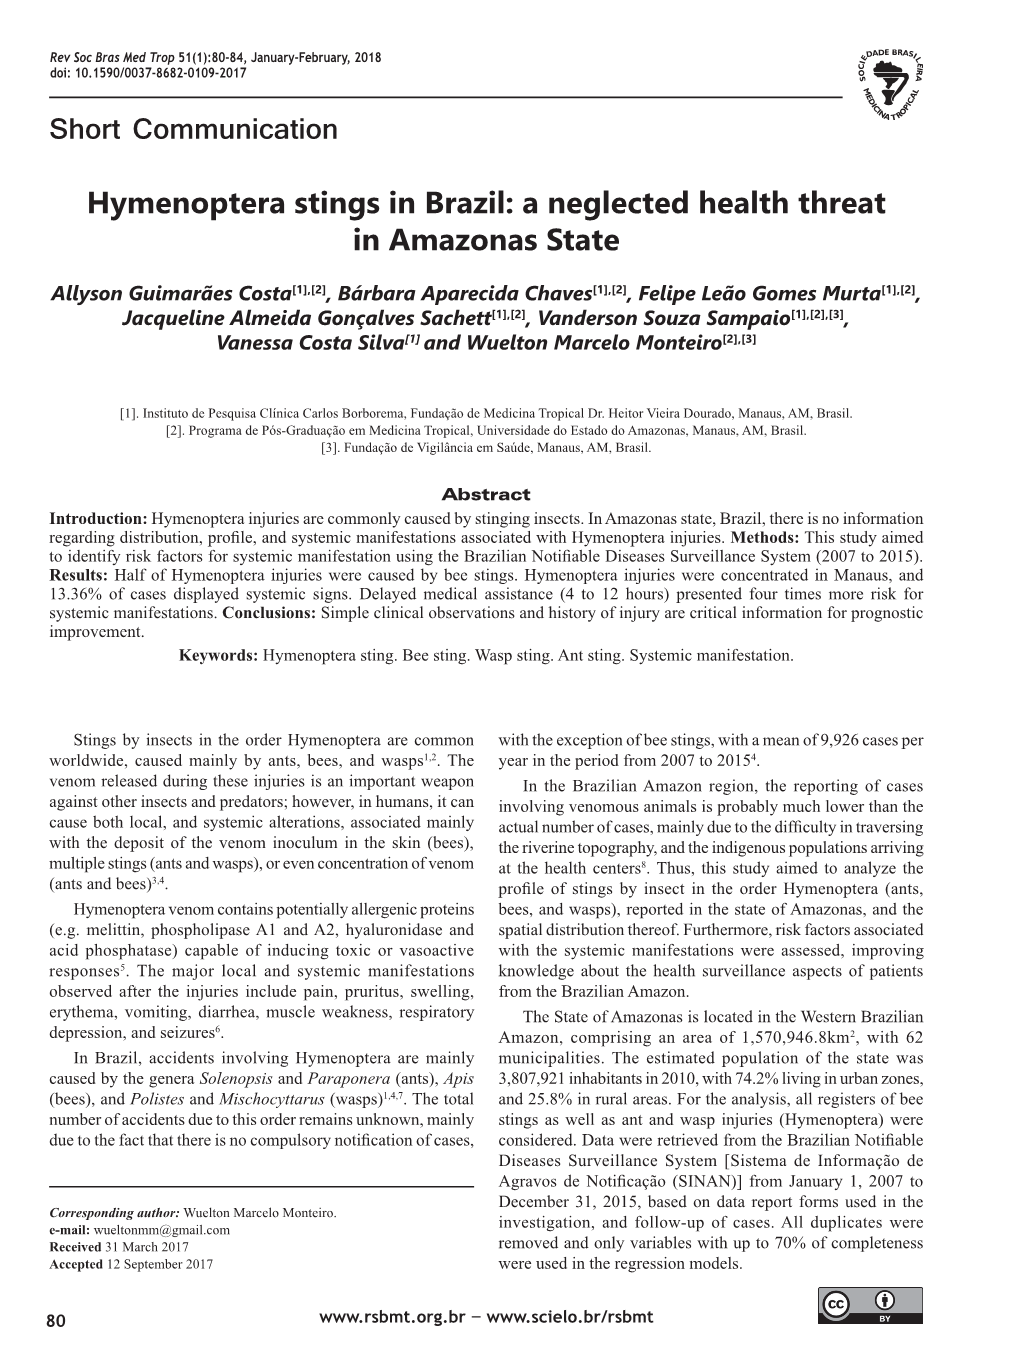 Hymenoptera Stings in Brazil: a Neglected Health Threat in Amazonas State